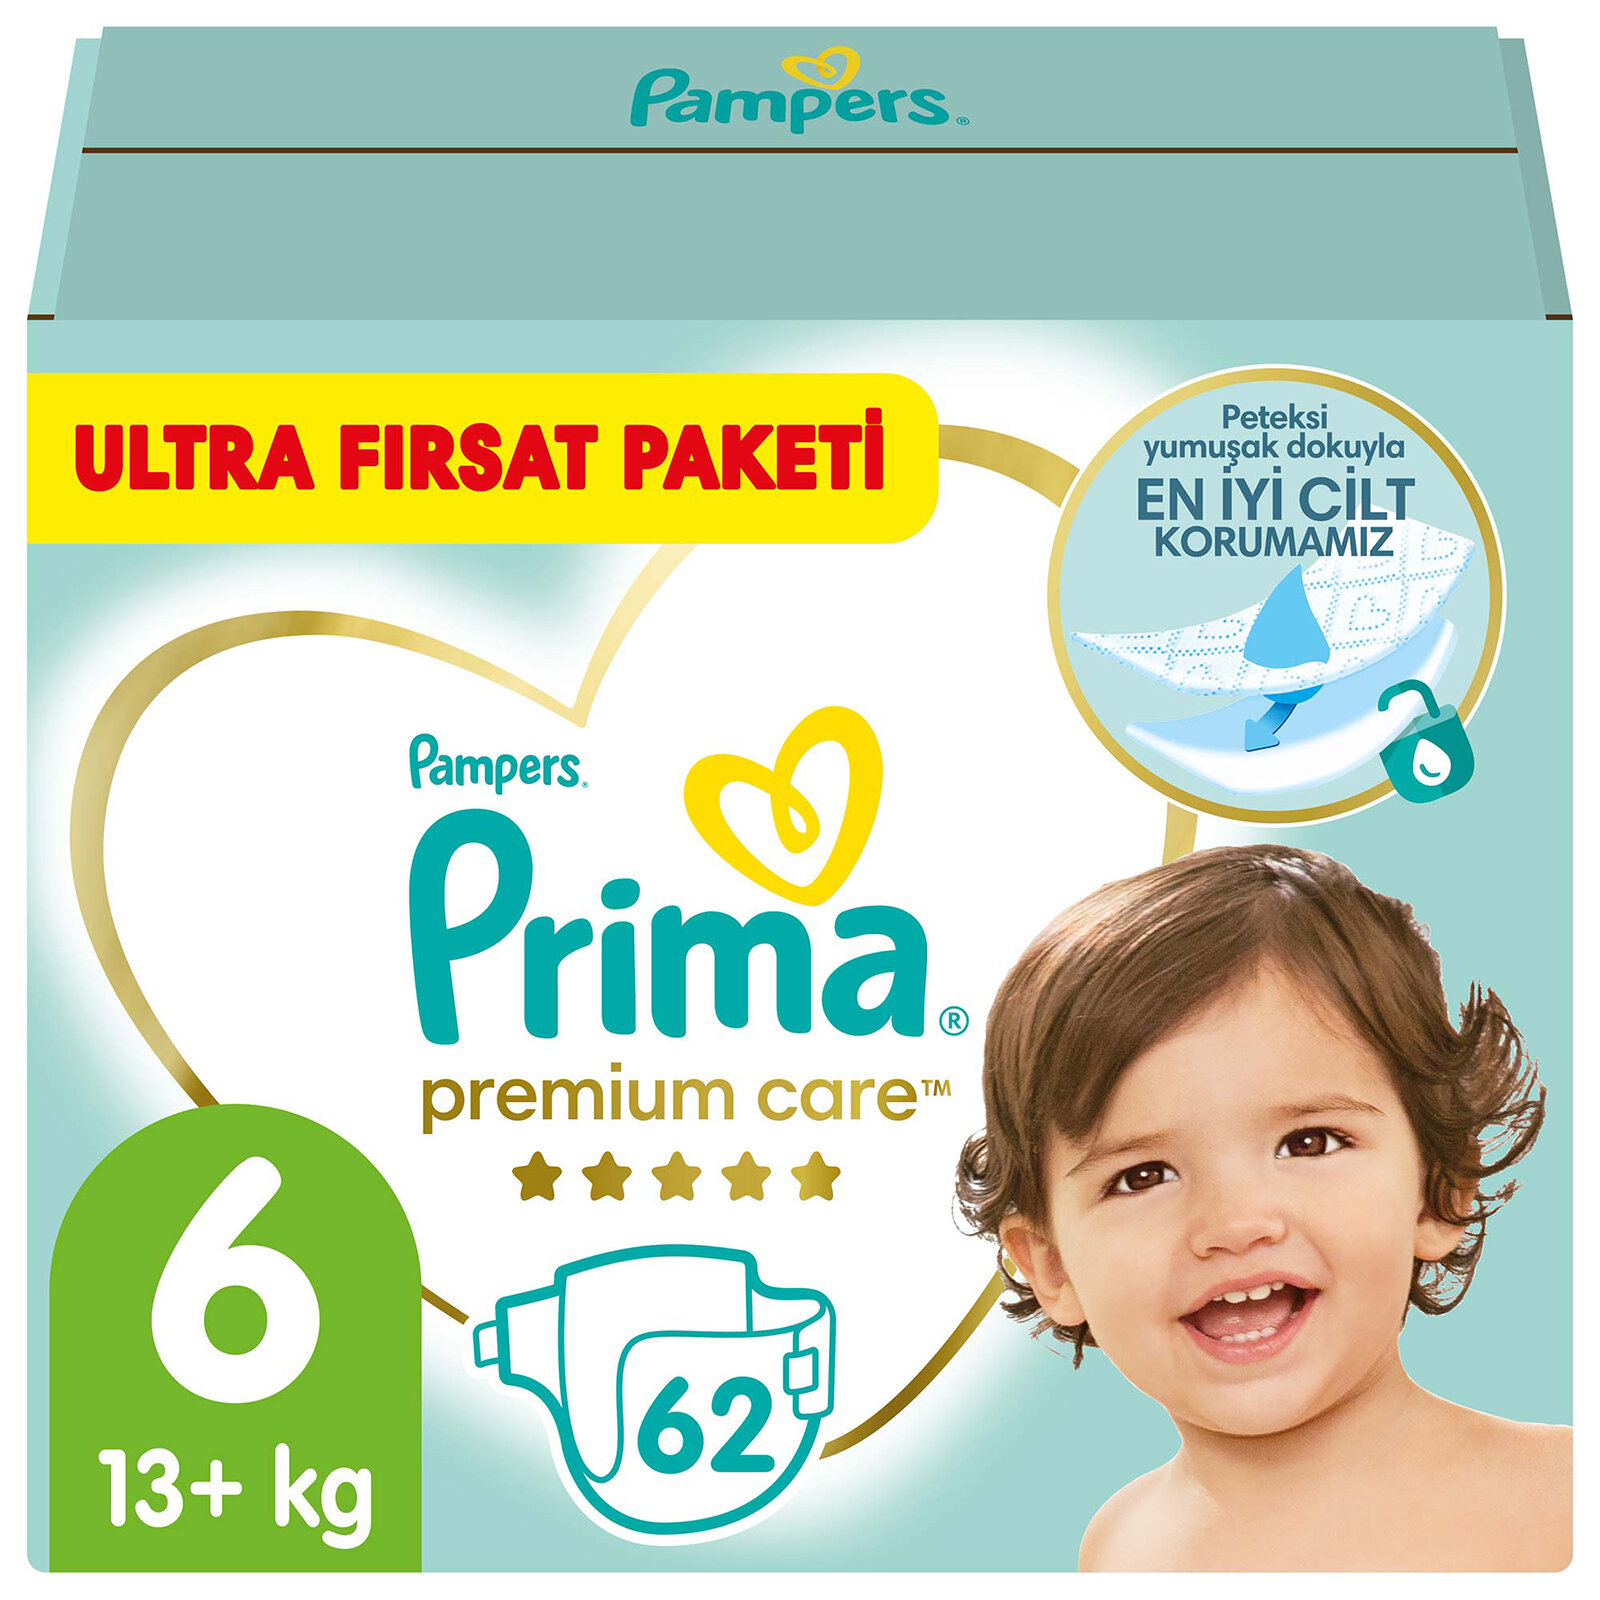 pampers 33